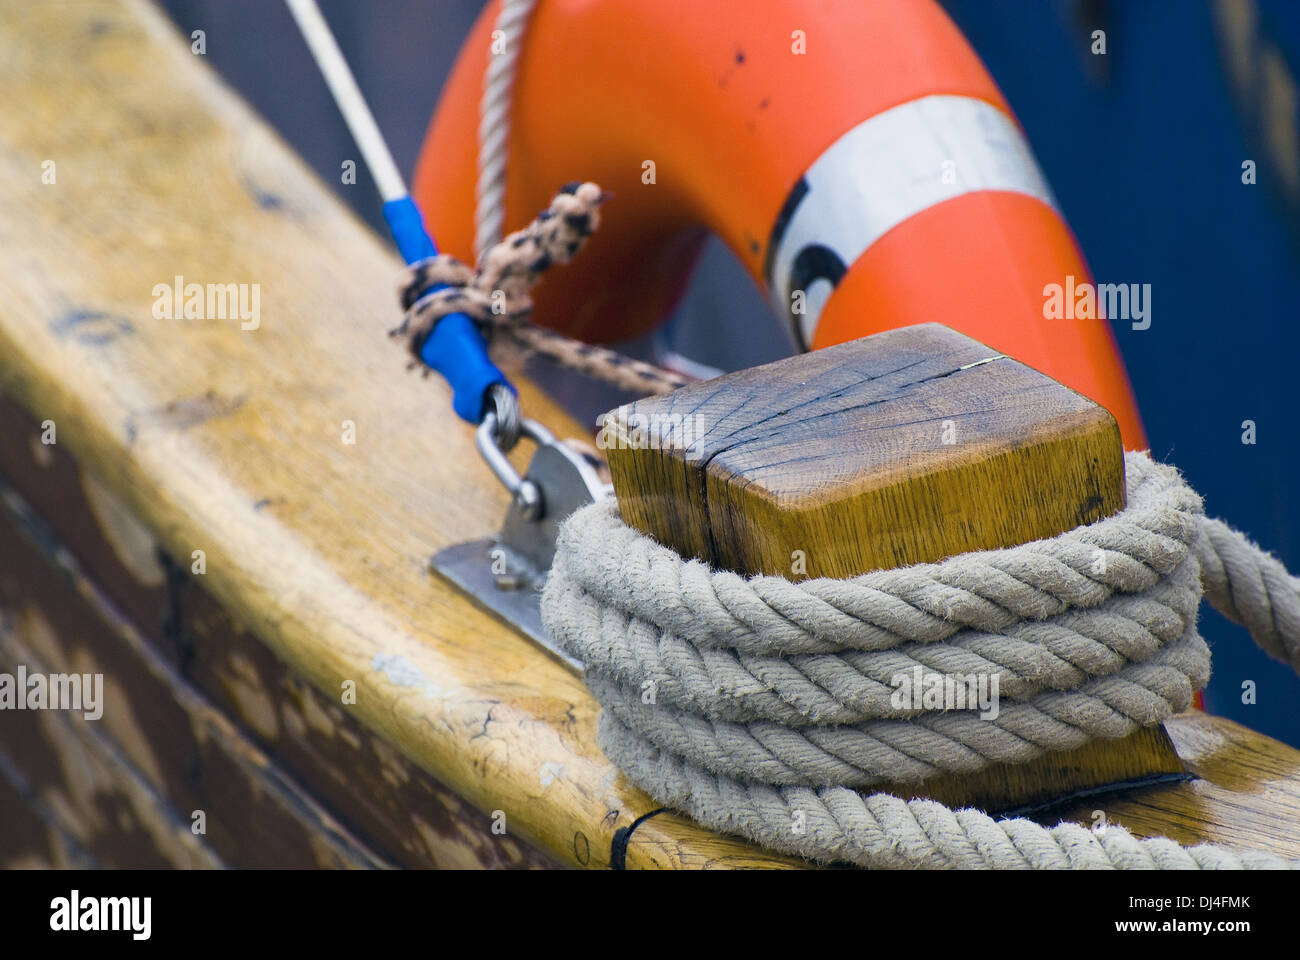 Details of a wooden boat Stock Photo